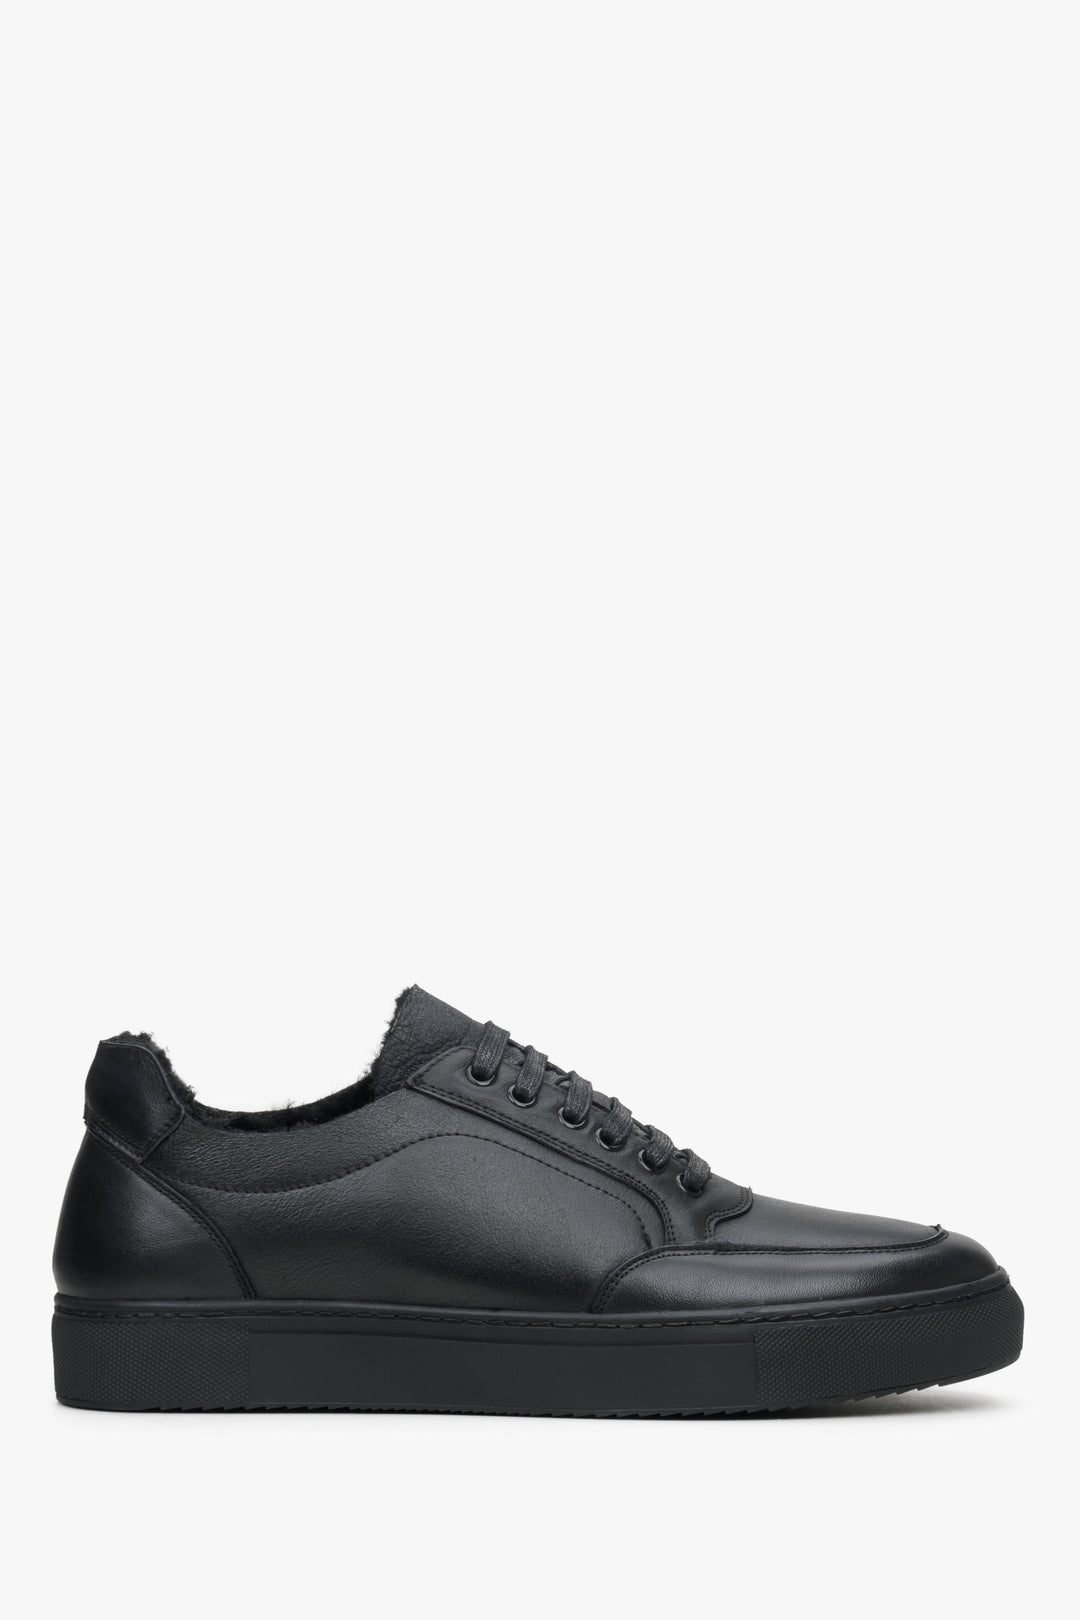 Men's Black Winter Sneakers made of Genuine Leather with Insulation Estro ER00114237.